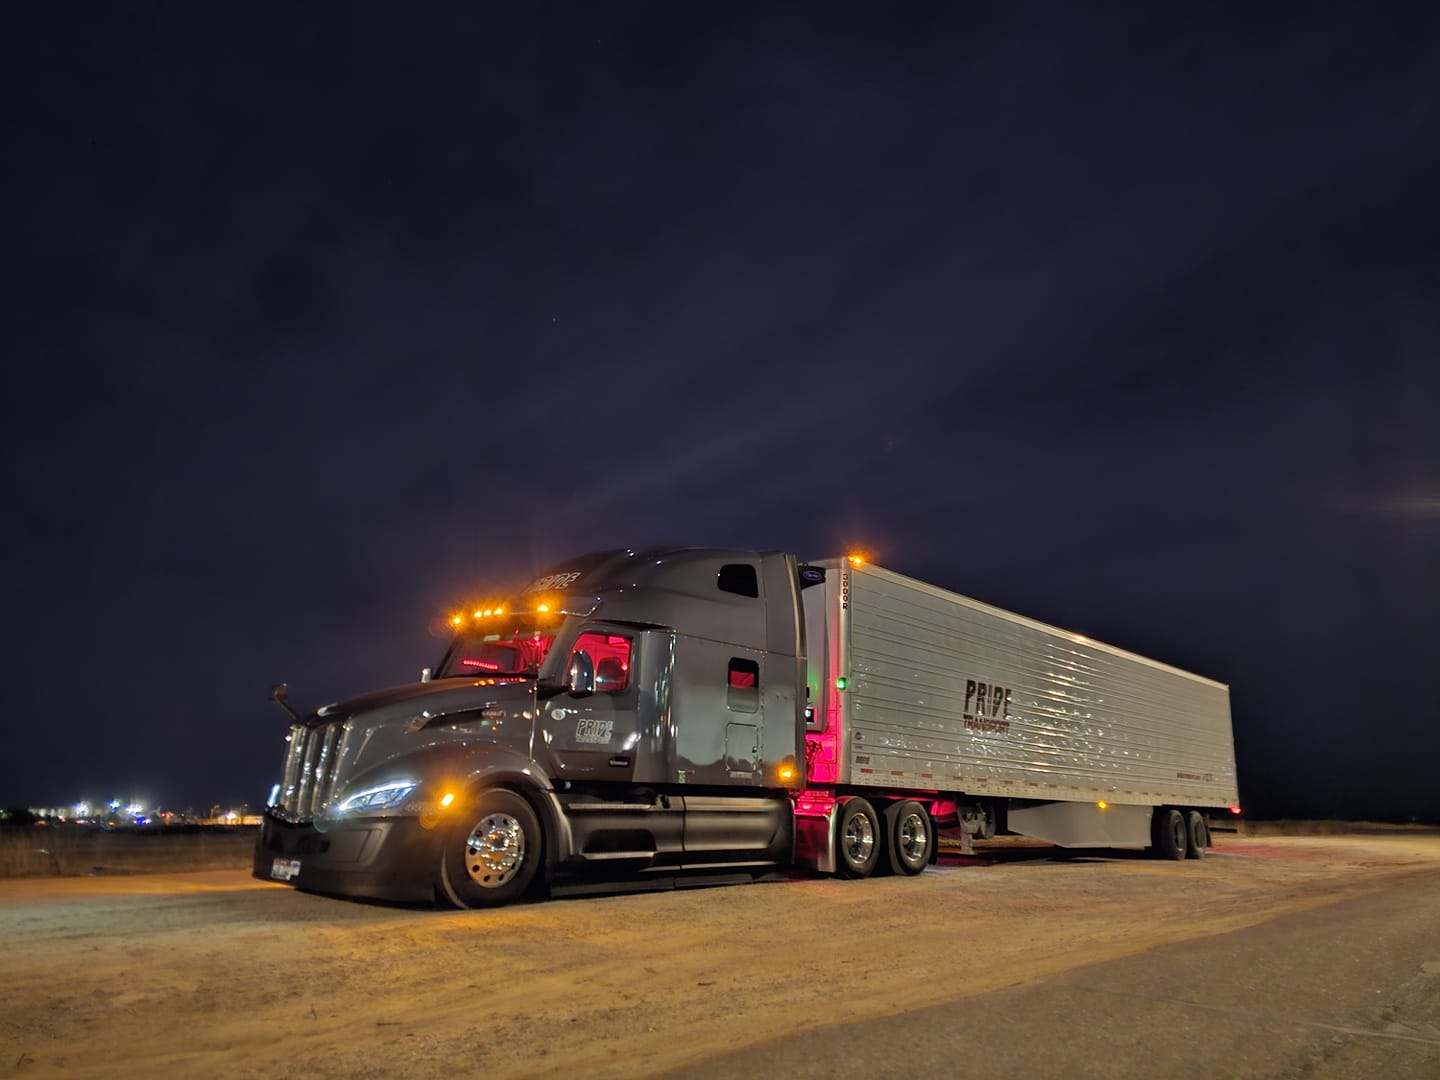 pride transport truck at night parked